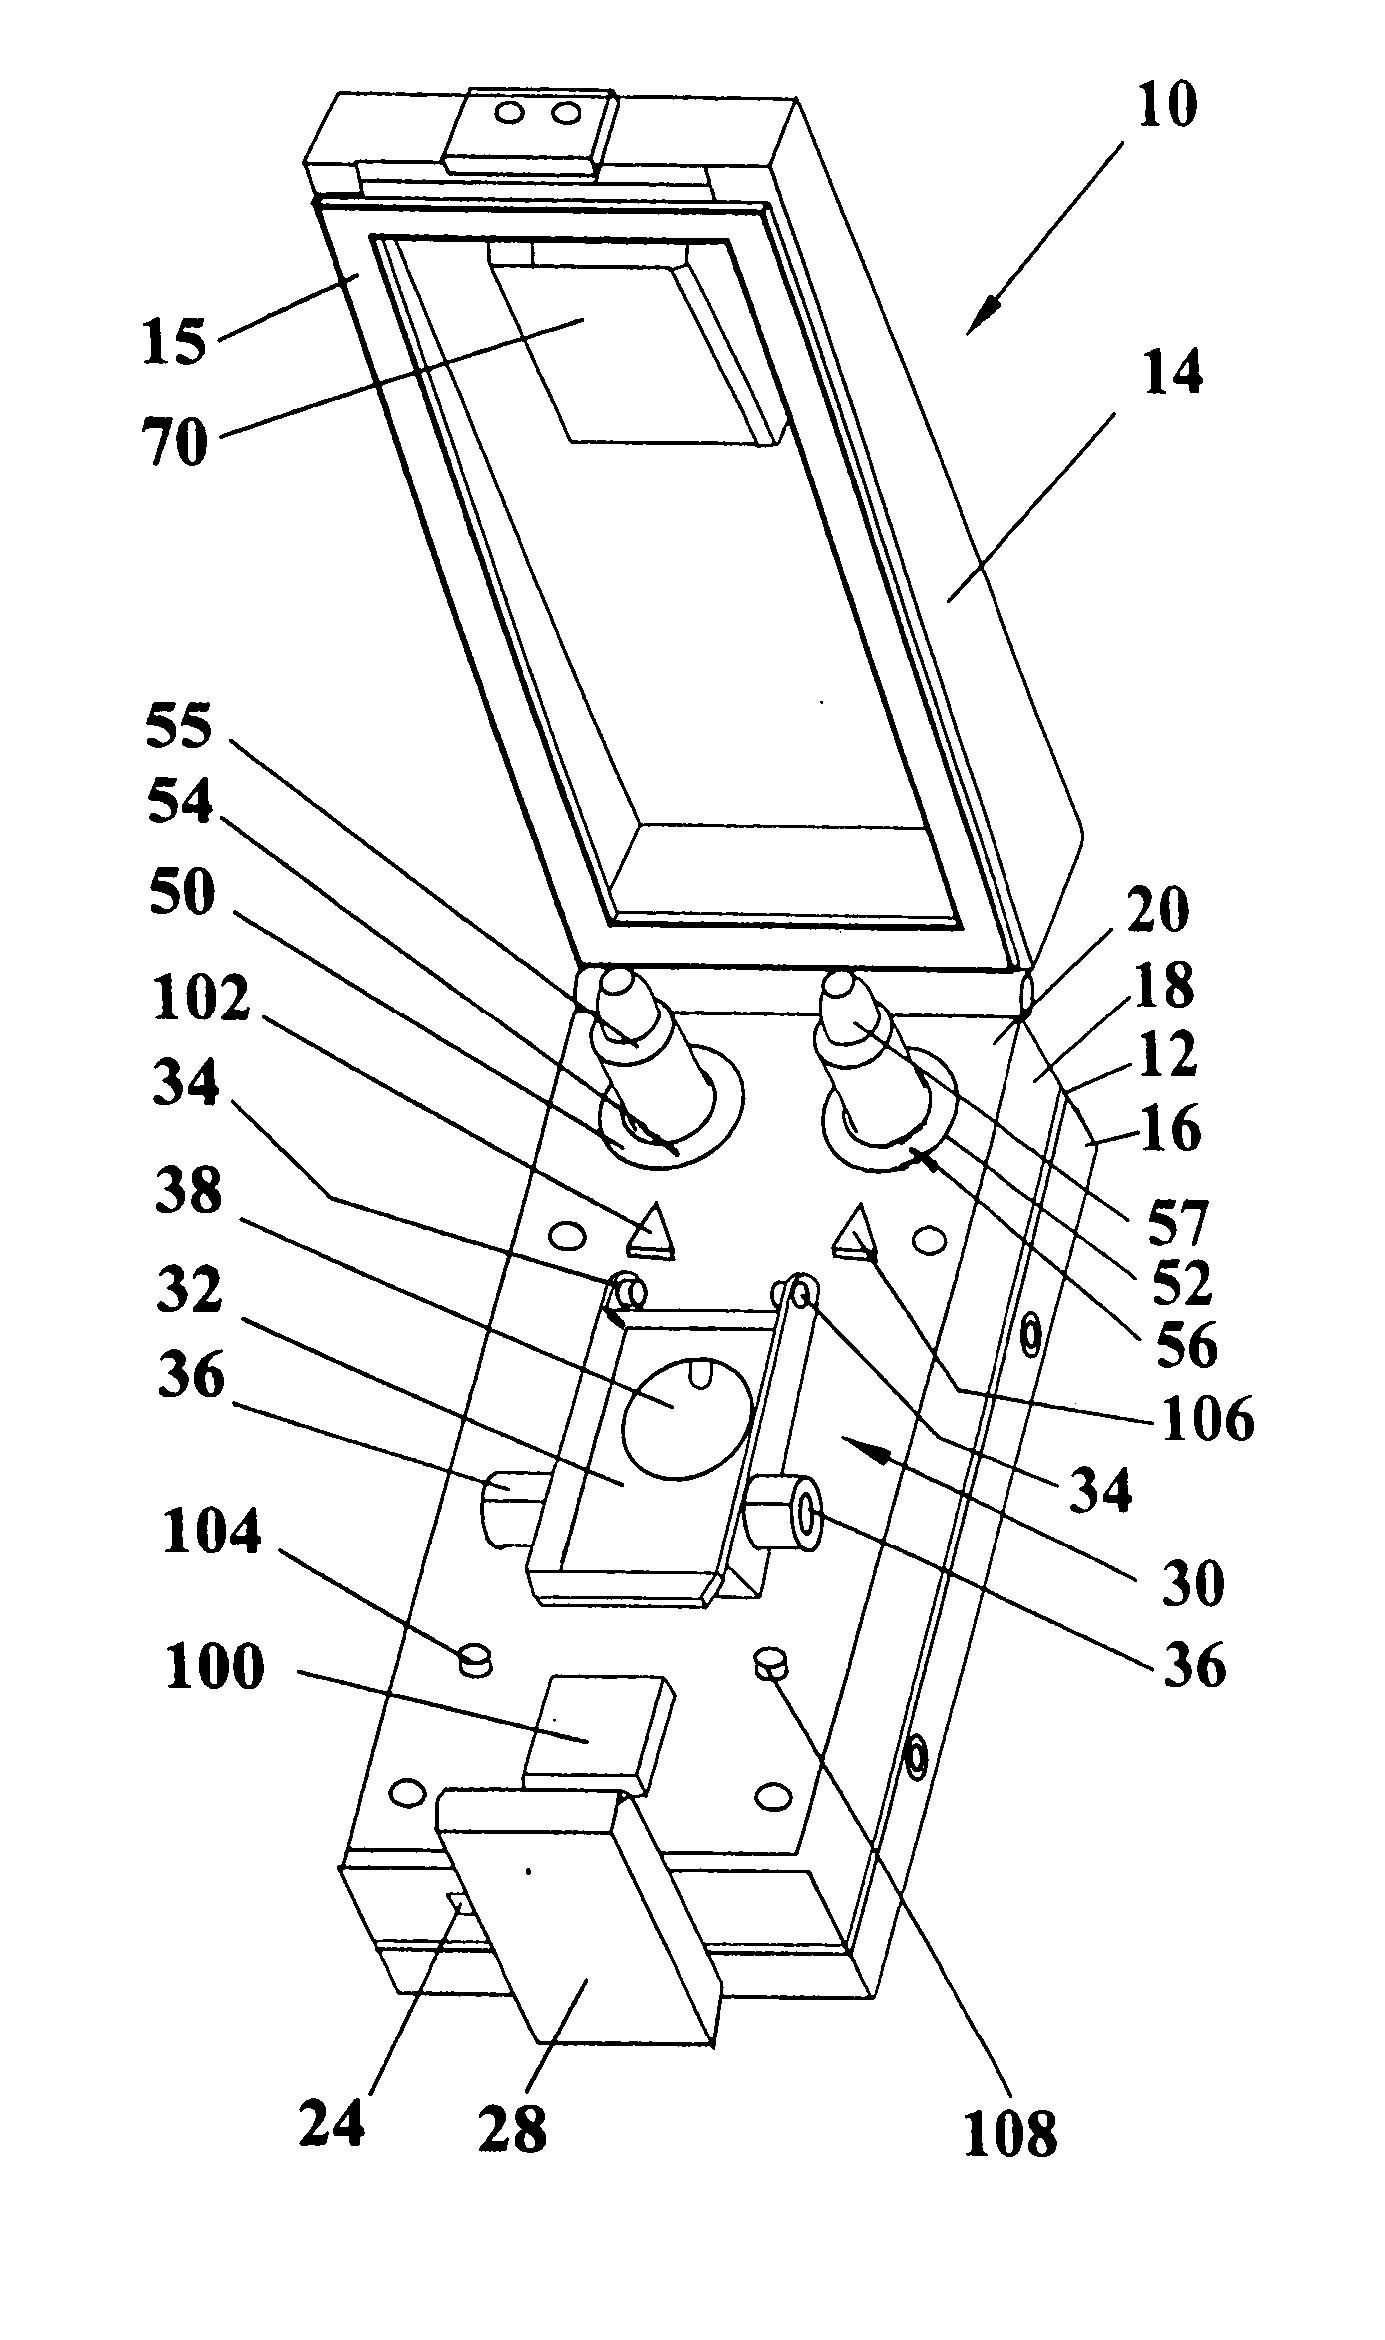 System and method for explosives detection